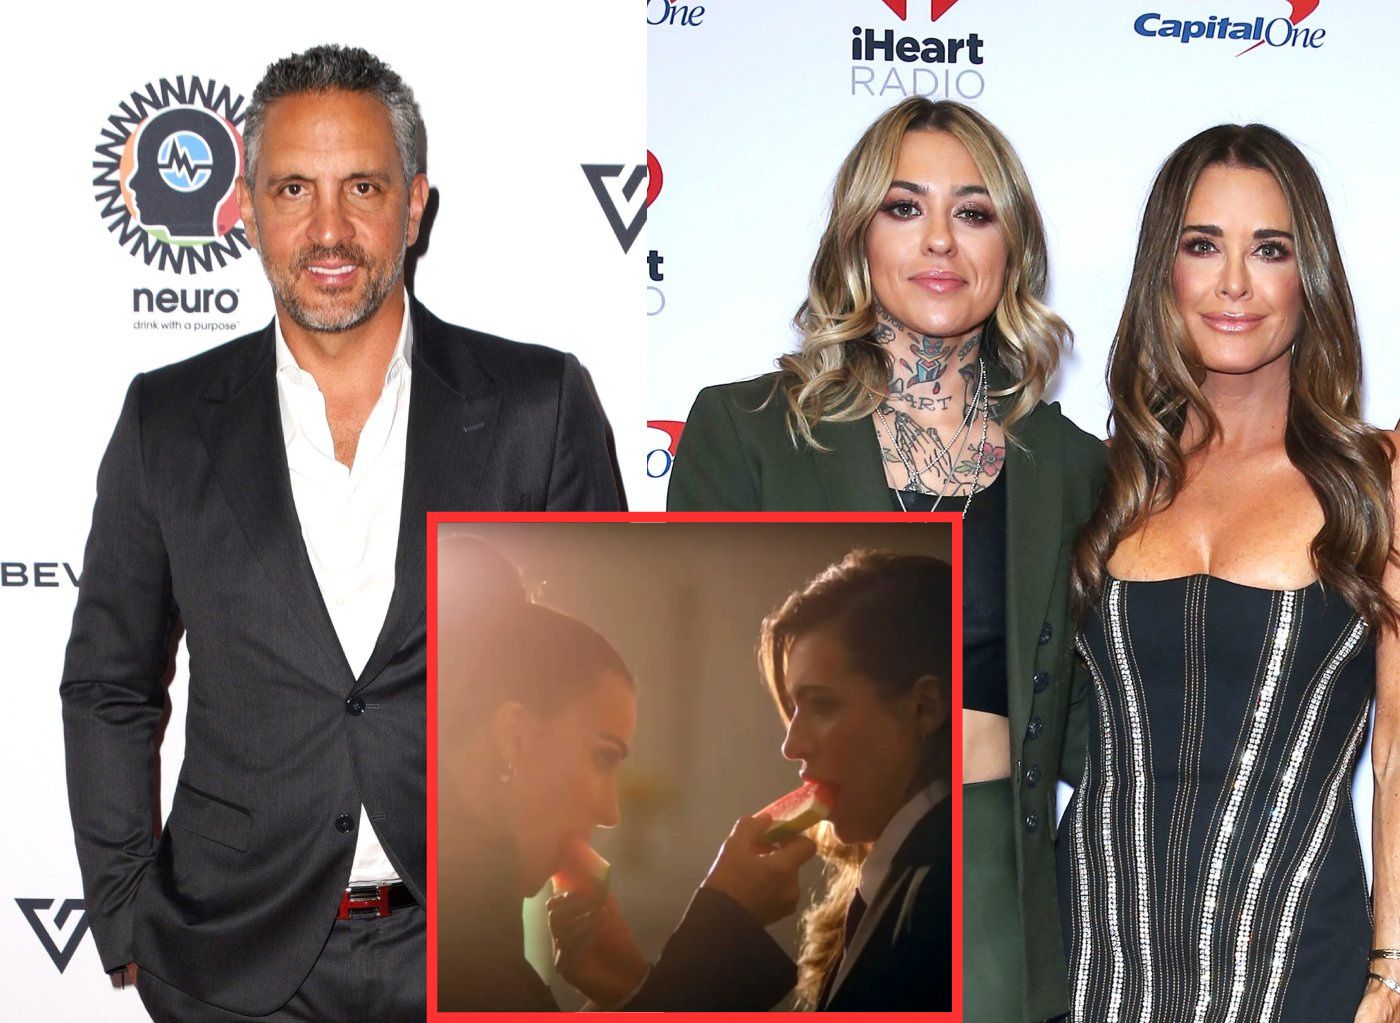 VIDEO: RHOBH's Mauricio Umansky Reacts as Kyle Richards' Nearly Kisses Morgan Wade in Music Video Amid Affair Rumors, Plus Pics From Steamy Clip